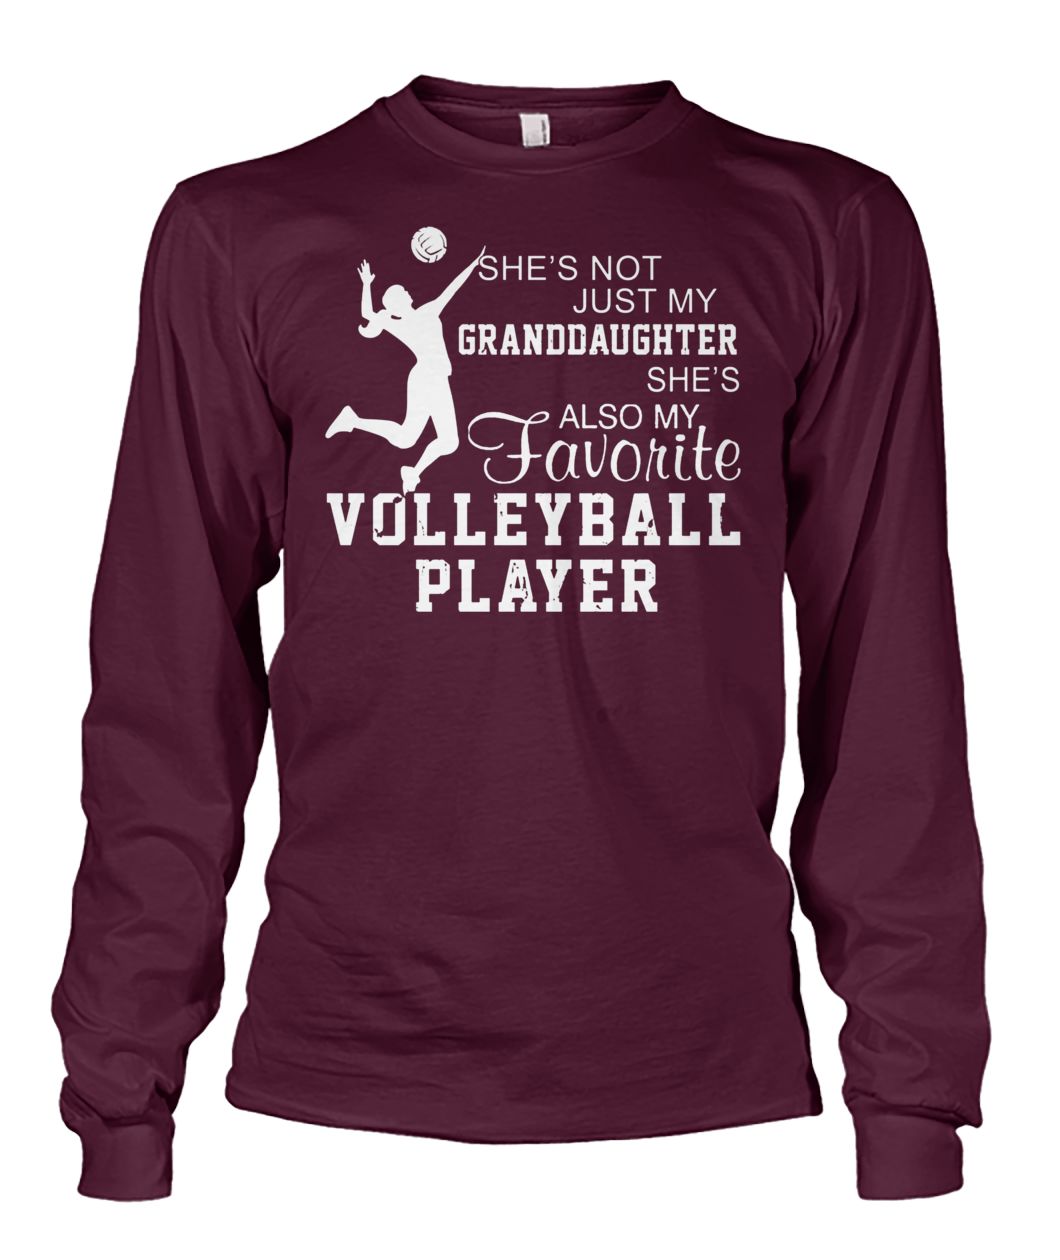 She's not just my granddaughter she's also my favorite volleyball player long sleeve